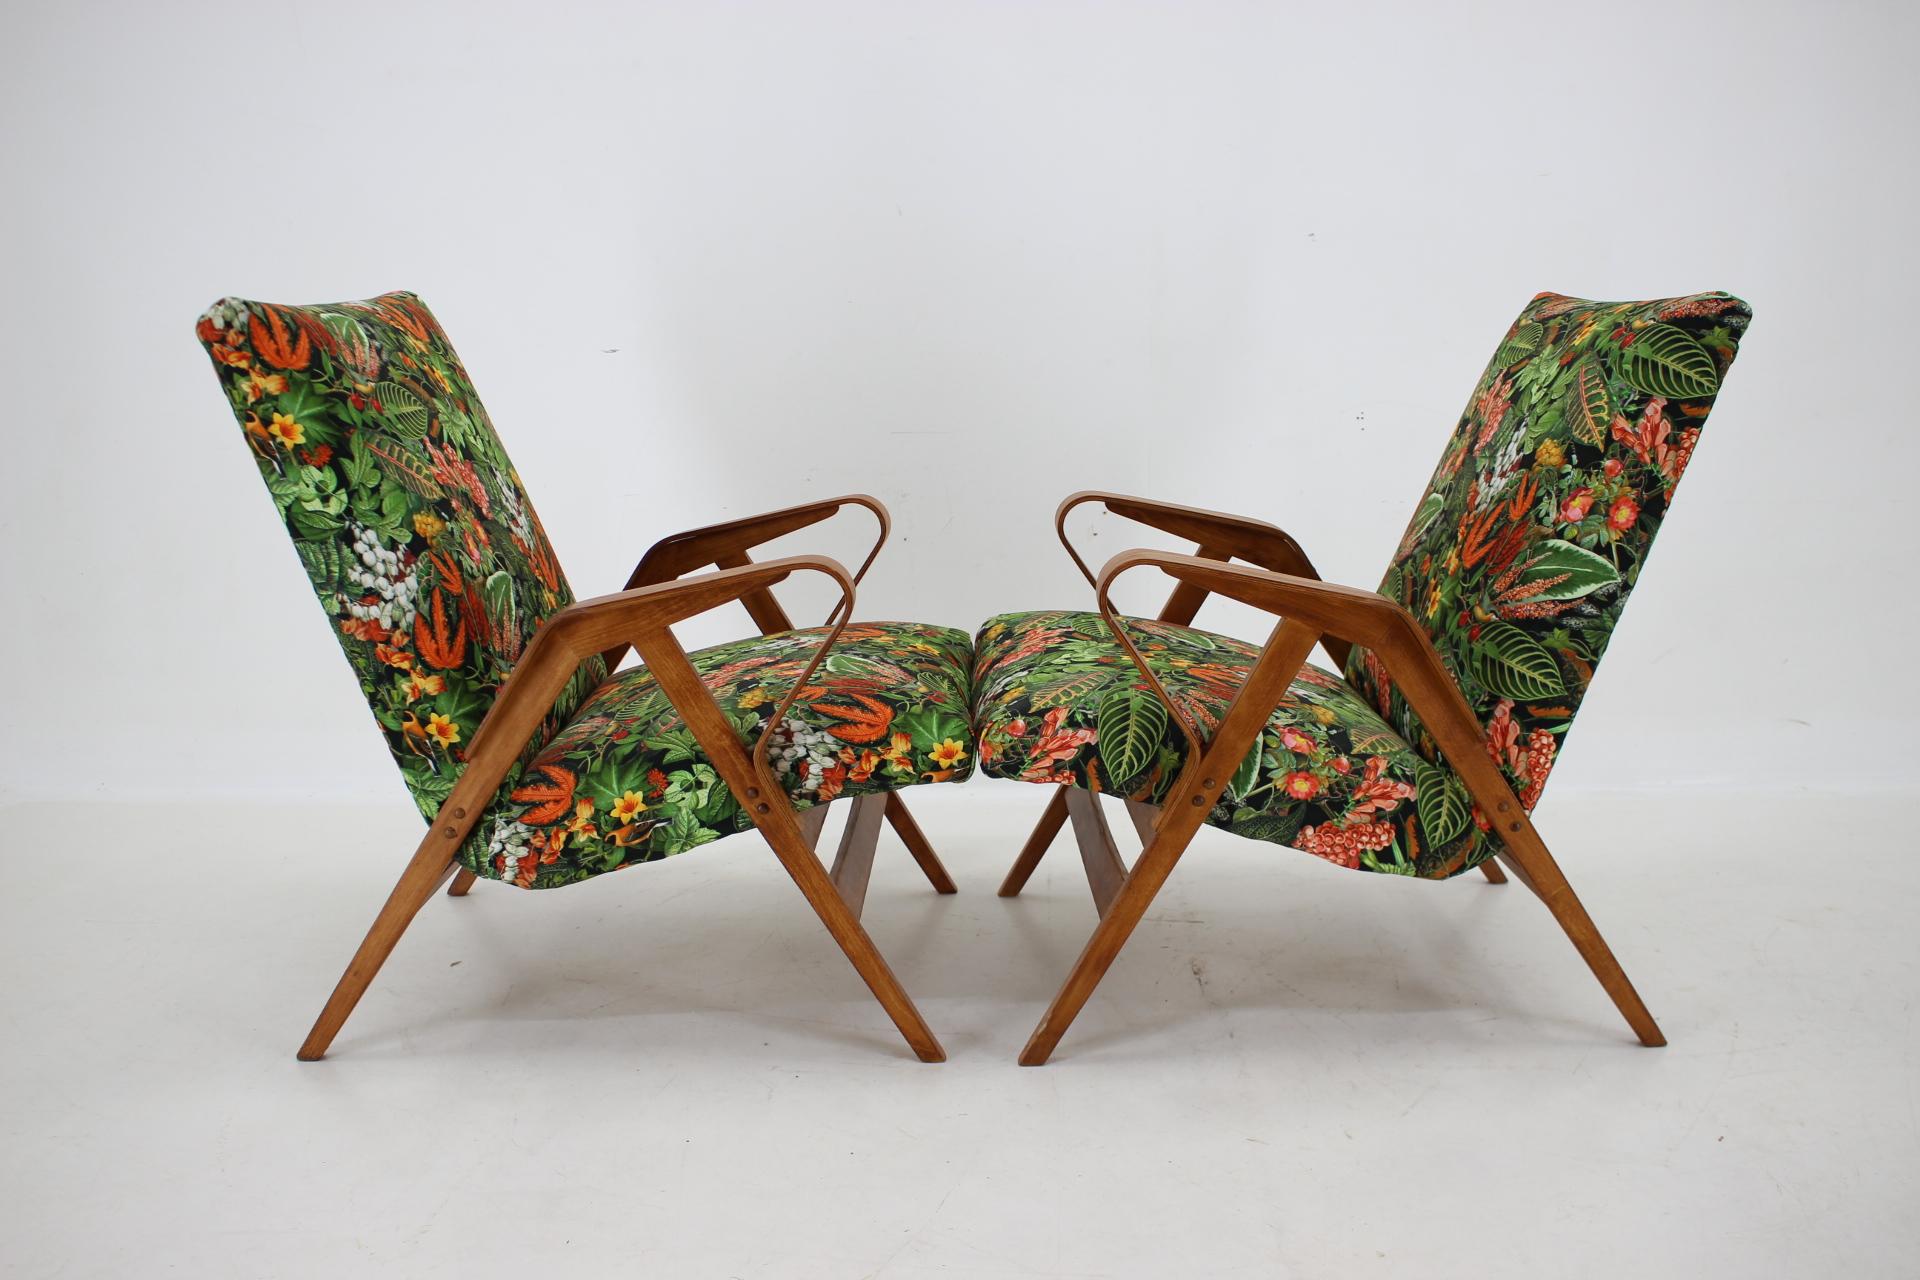 1960s Pair of Restored Tatra Chairs, Czechoslovakia For Sale 3